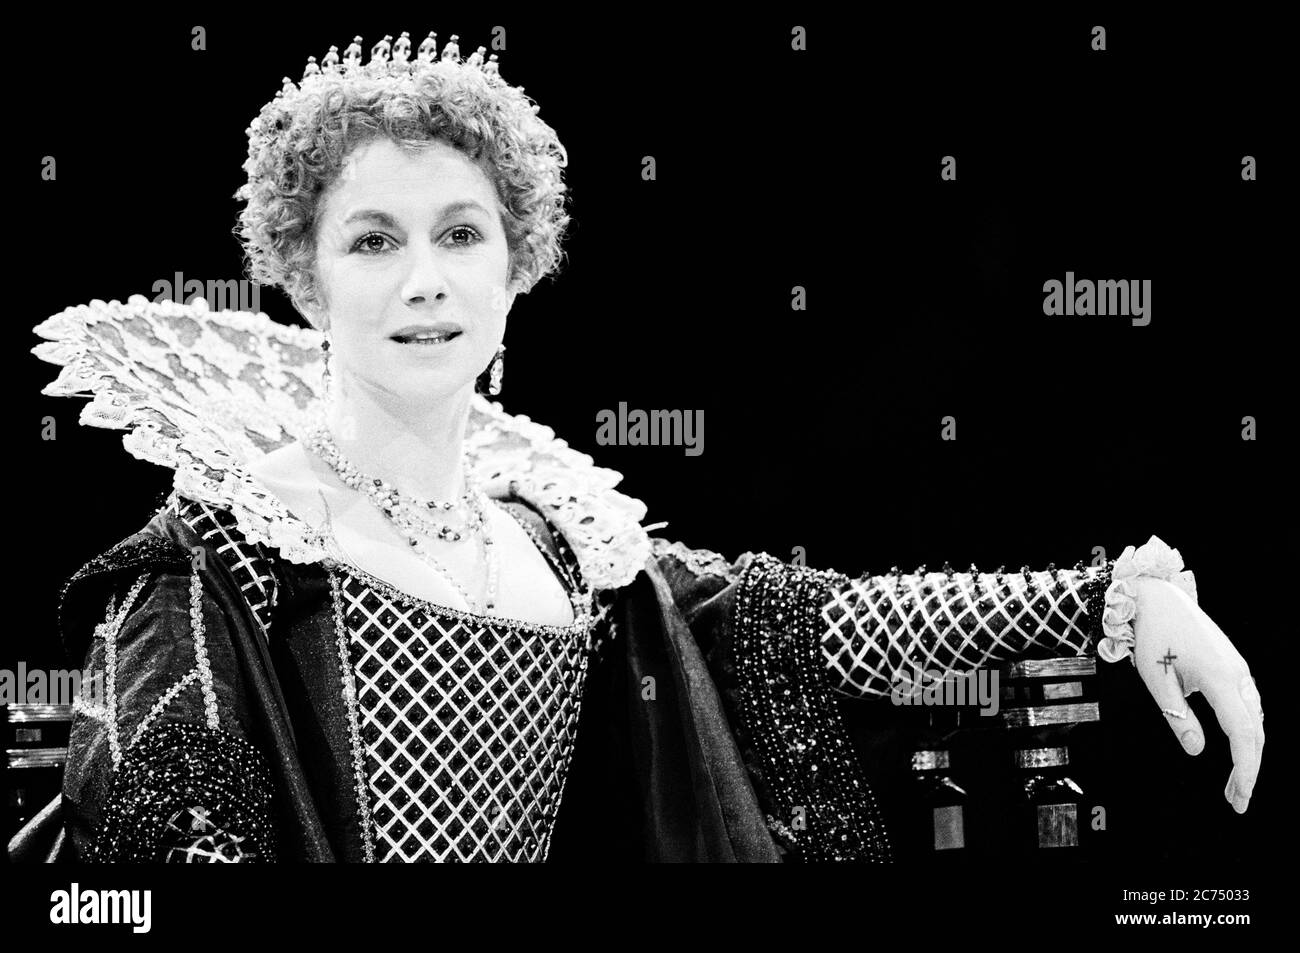 Helen Mirren (The Duchess of Malfi) in THE DUCHESS OF MALFI by John Webster at the Royal Exchange Theatre, Manchester 16/09/1980  transferred to the Roundhouse, London NW1  01/04/1981  design: Bob Crowley   lighting: Geoffrey Joyce   director: Adrian Noble Royal Exchange Theatre, Manchester  16/09/1980   Roundhouse, London NW1  01/04/1981 Stock Photo